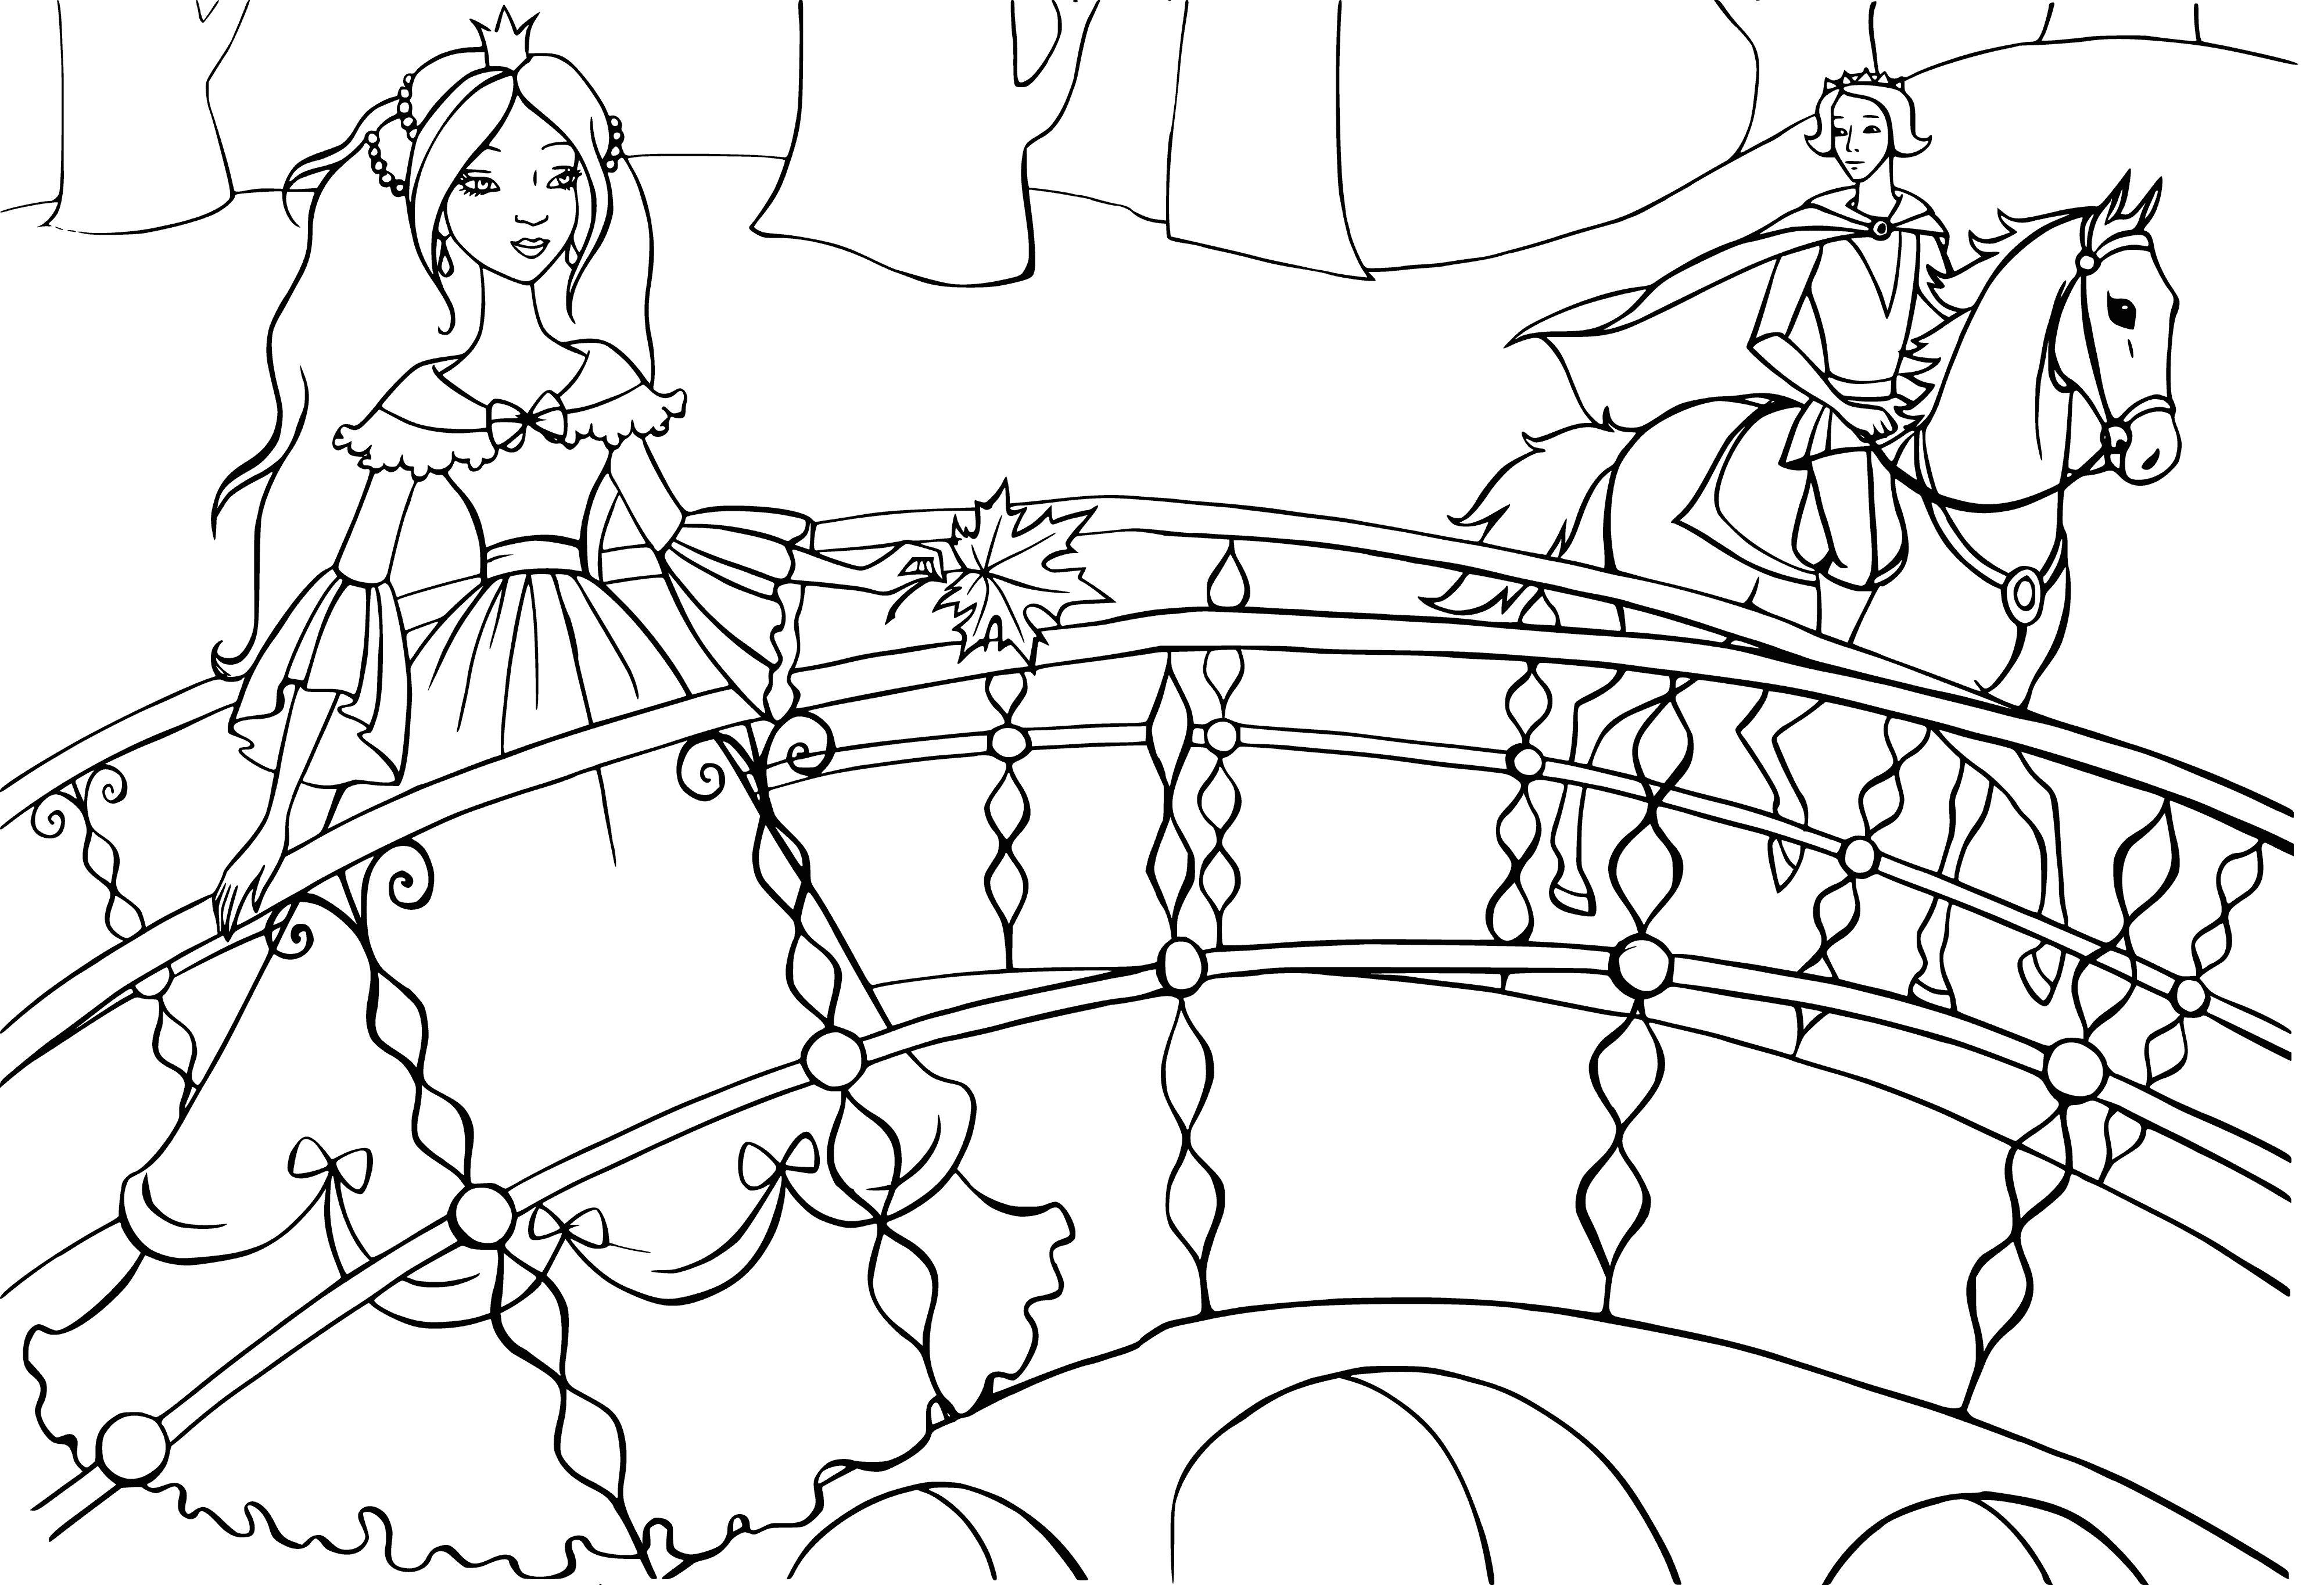 coloring page: Princess stands on bridge in a fairy kingdom of trees, flowers, and blue sky. She has long blonde hair and a pink dress and holds a wand. #FairyTales